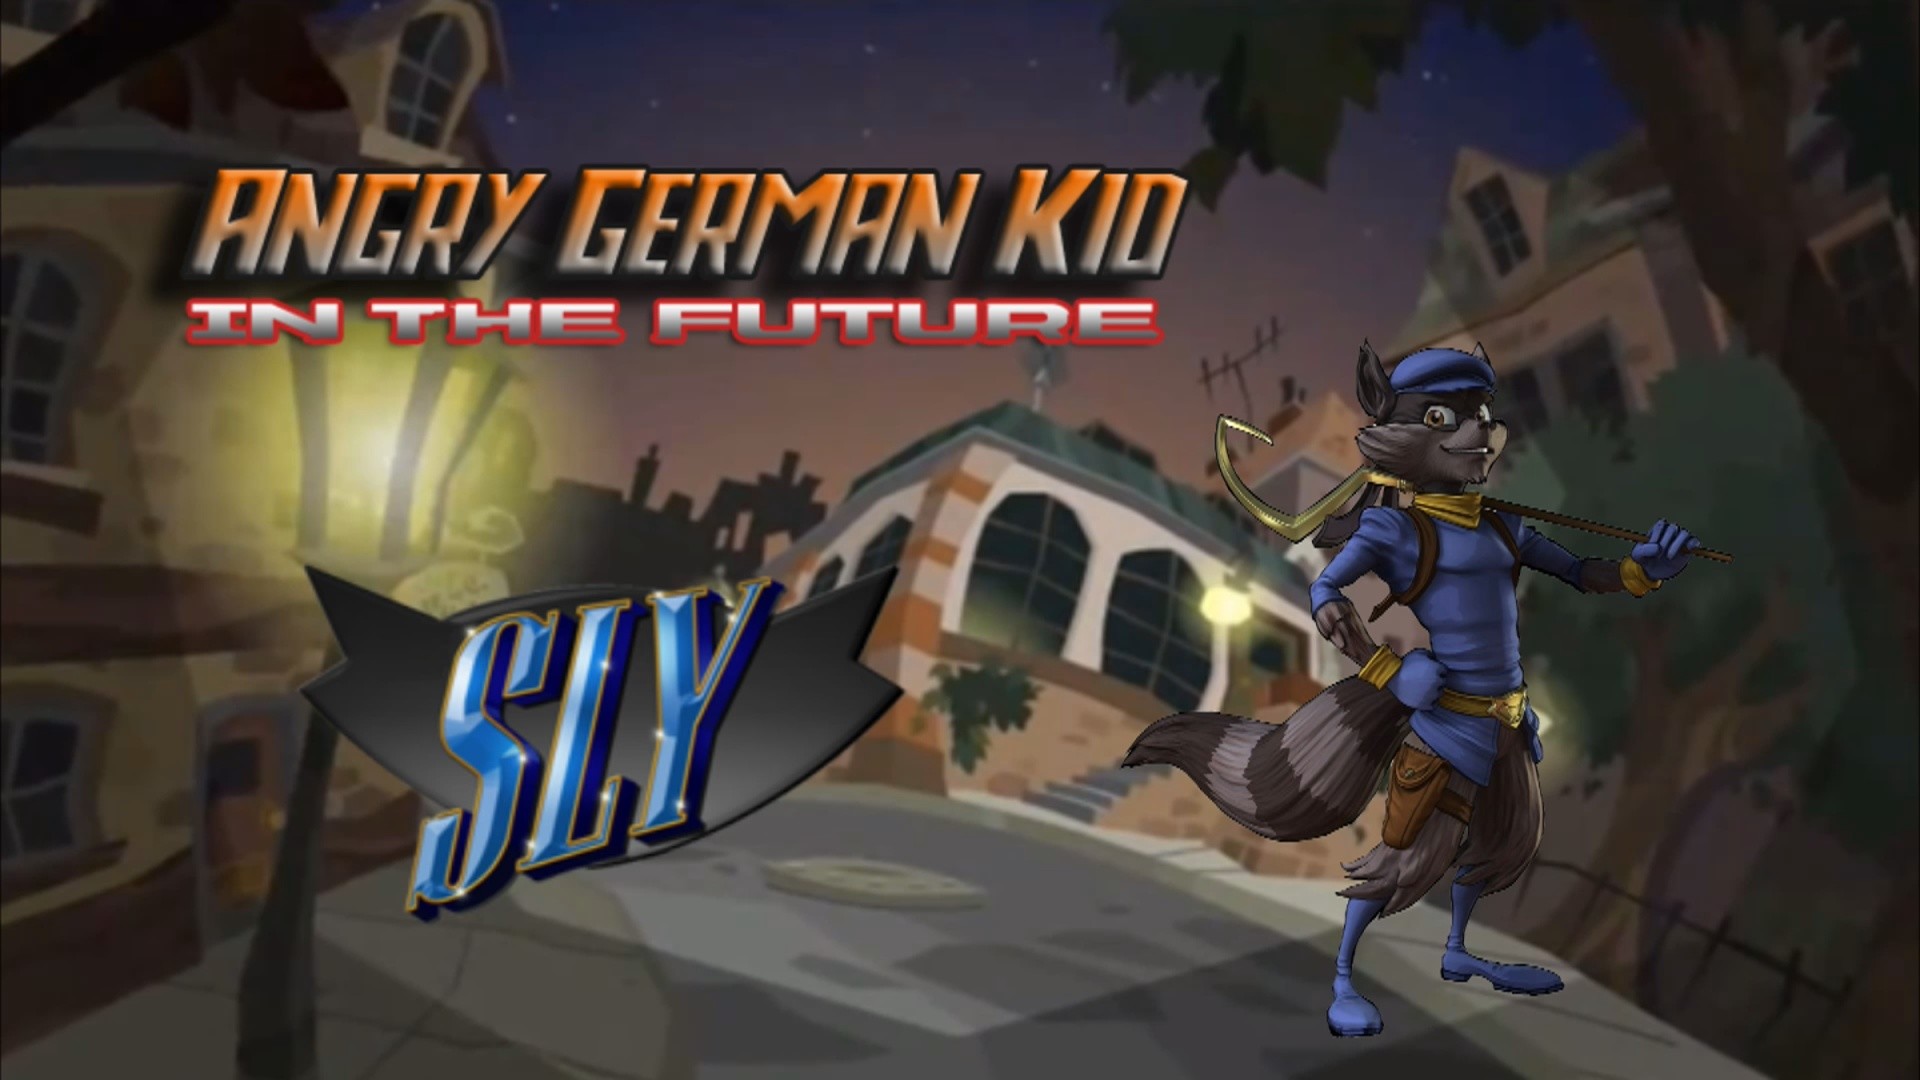 1920x1080 Image - Sly Cooper Wallpaper.jpg | Angry German Kid Wiki | FANDOM powered  by Wikia